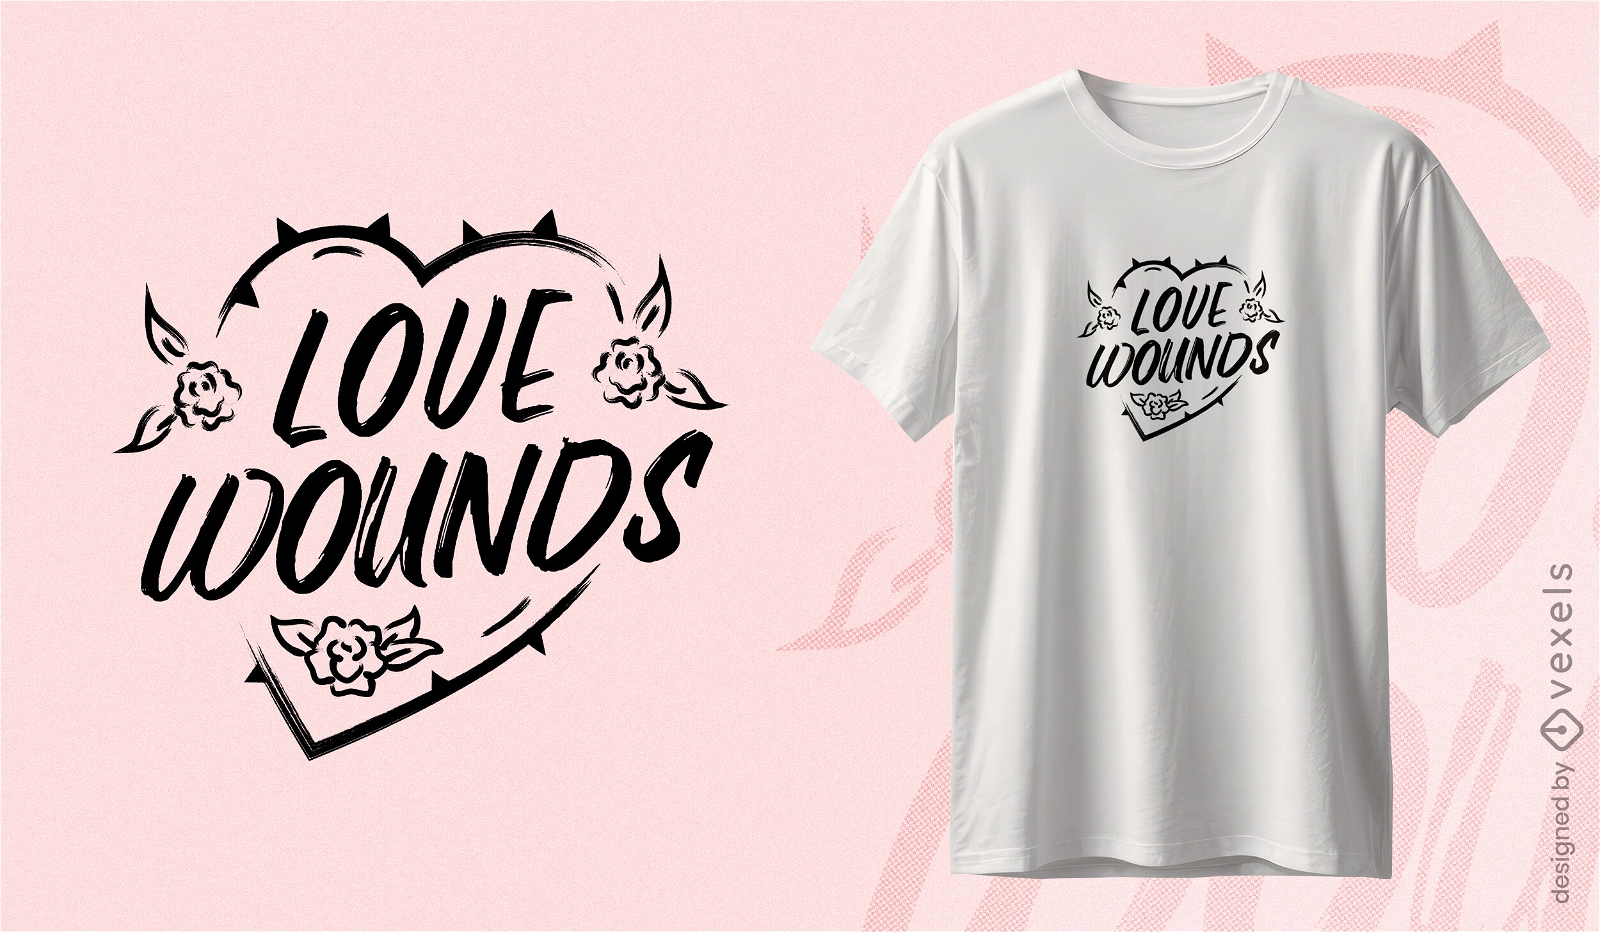 Thorny love quote t-shirt design